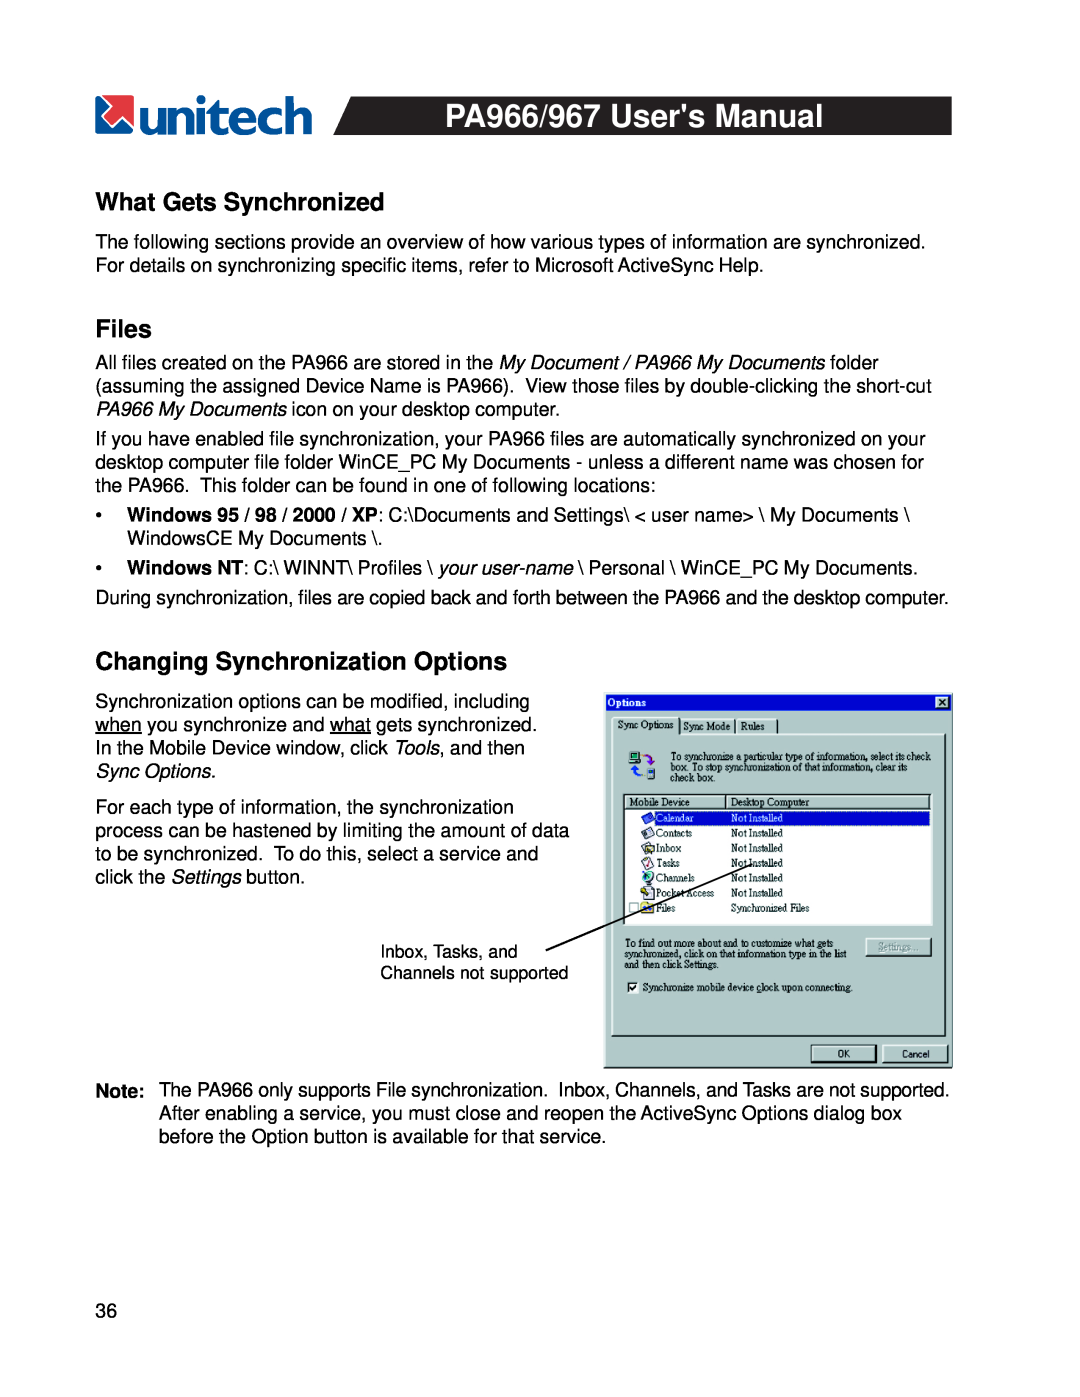 Unitech PA967, PA966 user manual What Gets Synchronized, Files, Changing Synchronization Options 